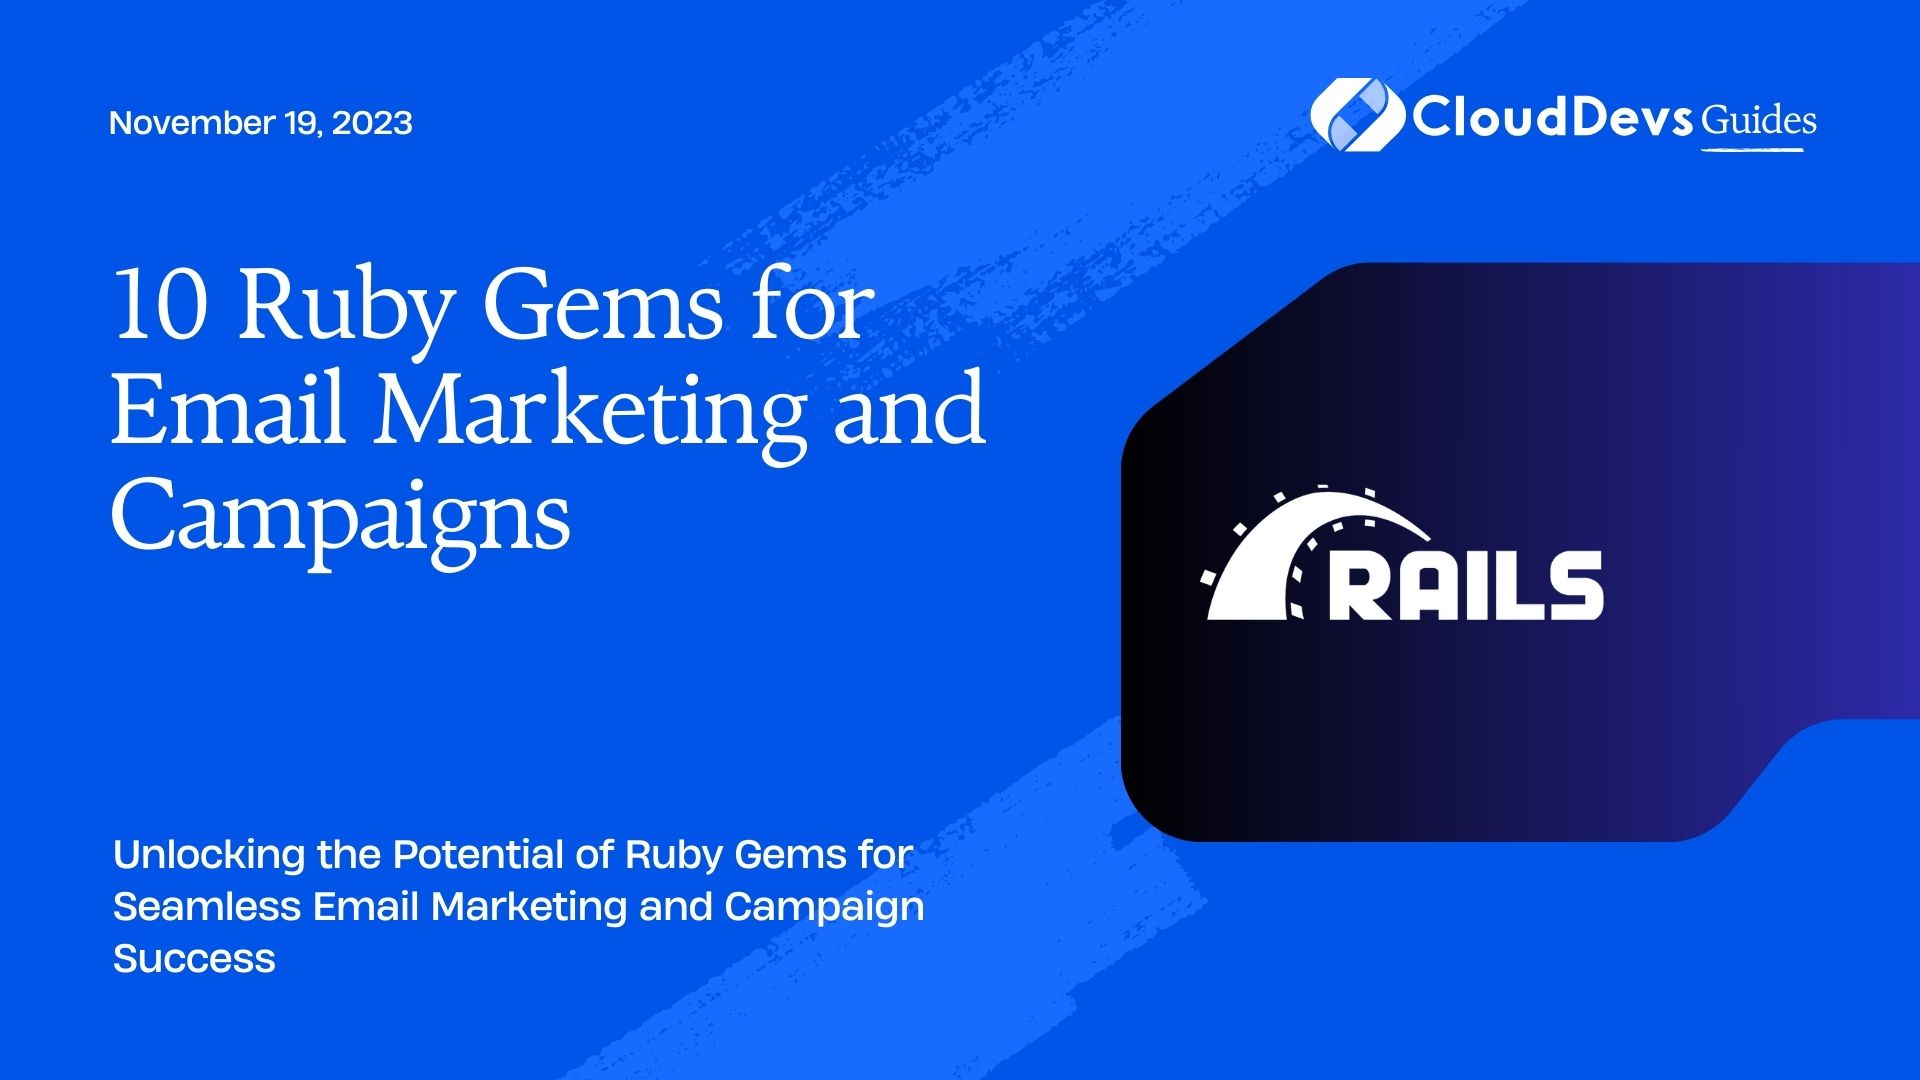 10 Ruby Gems for Email Marketing and Campaigns